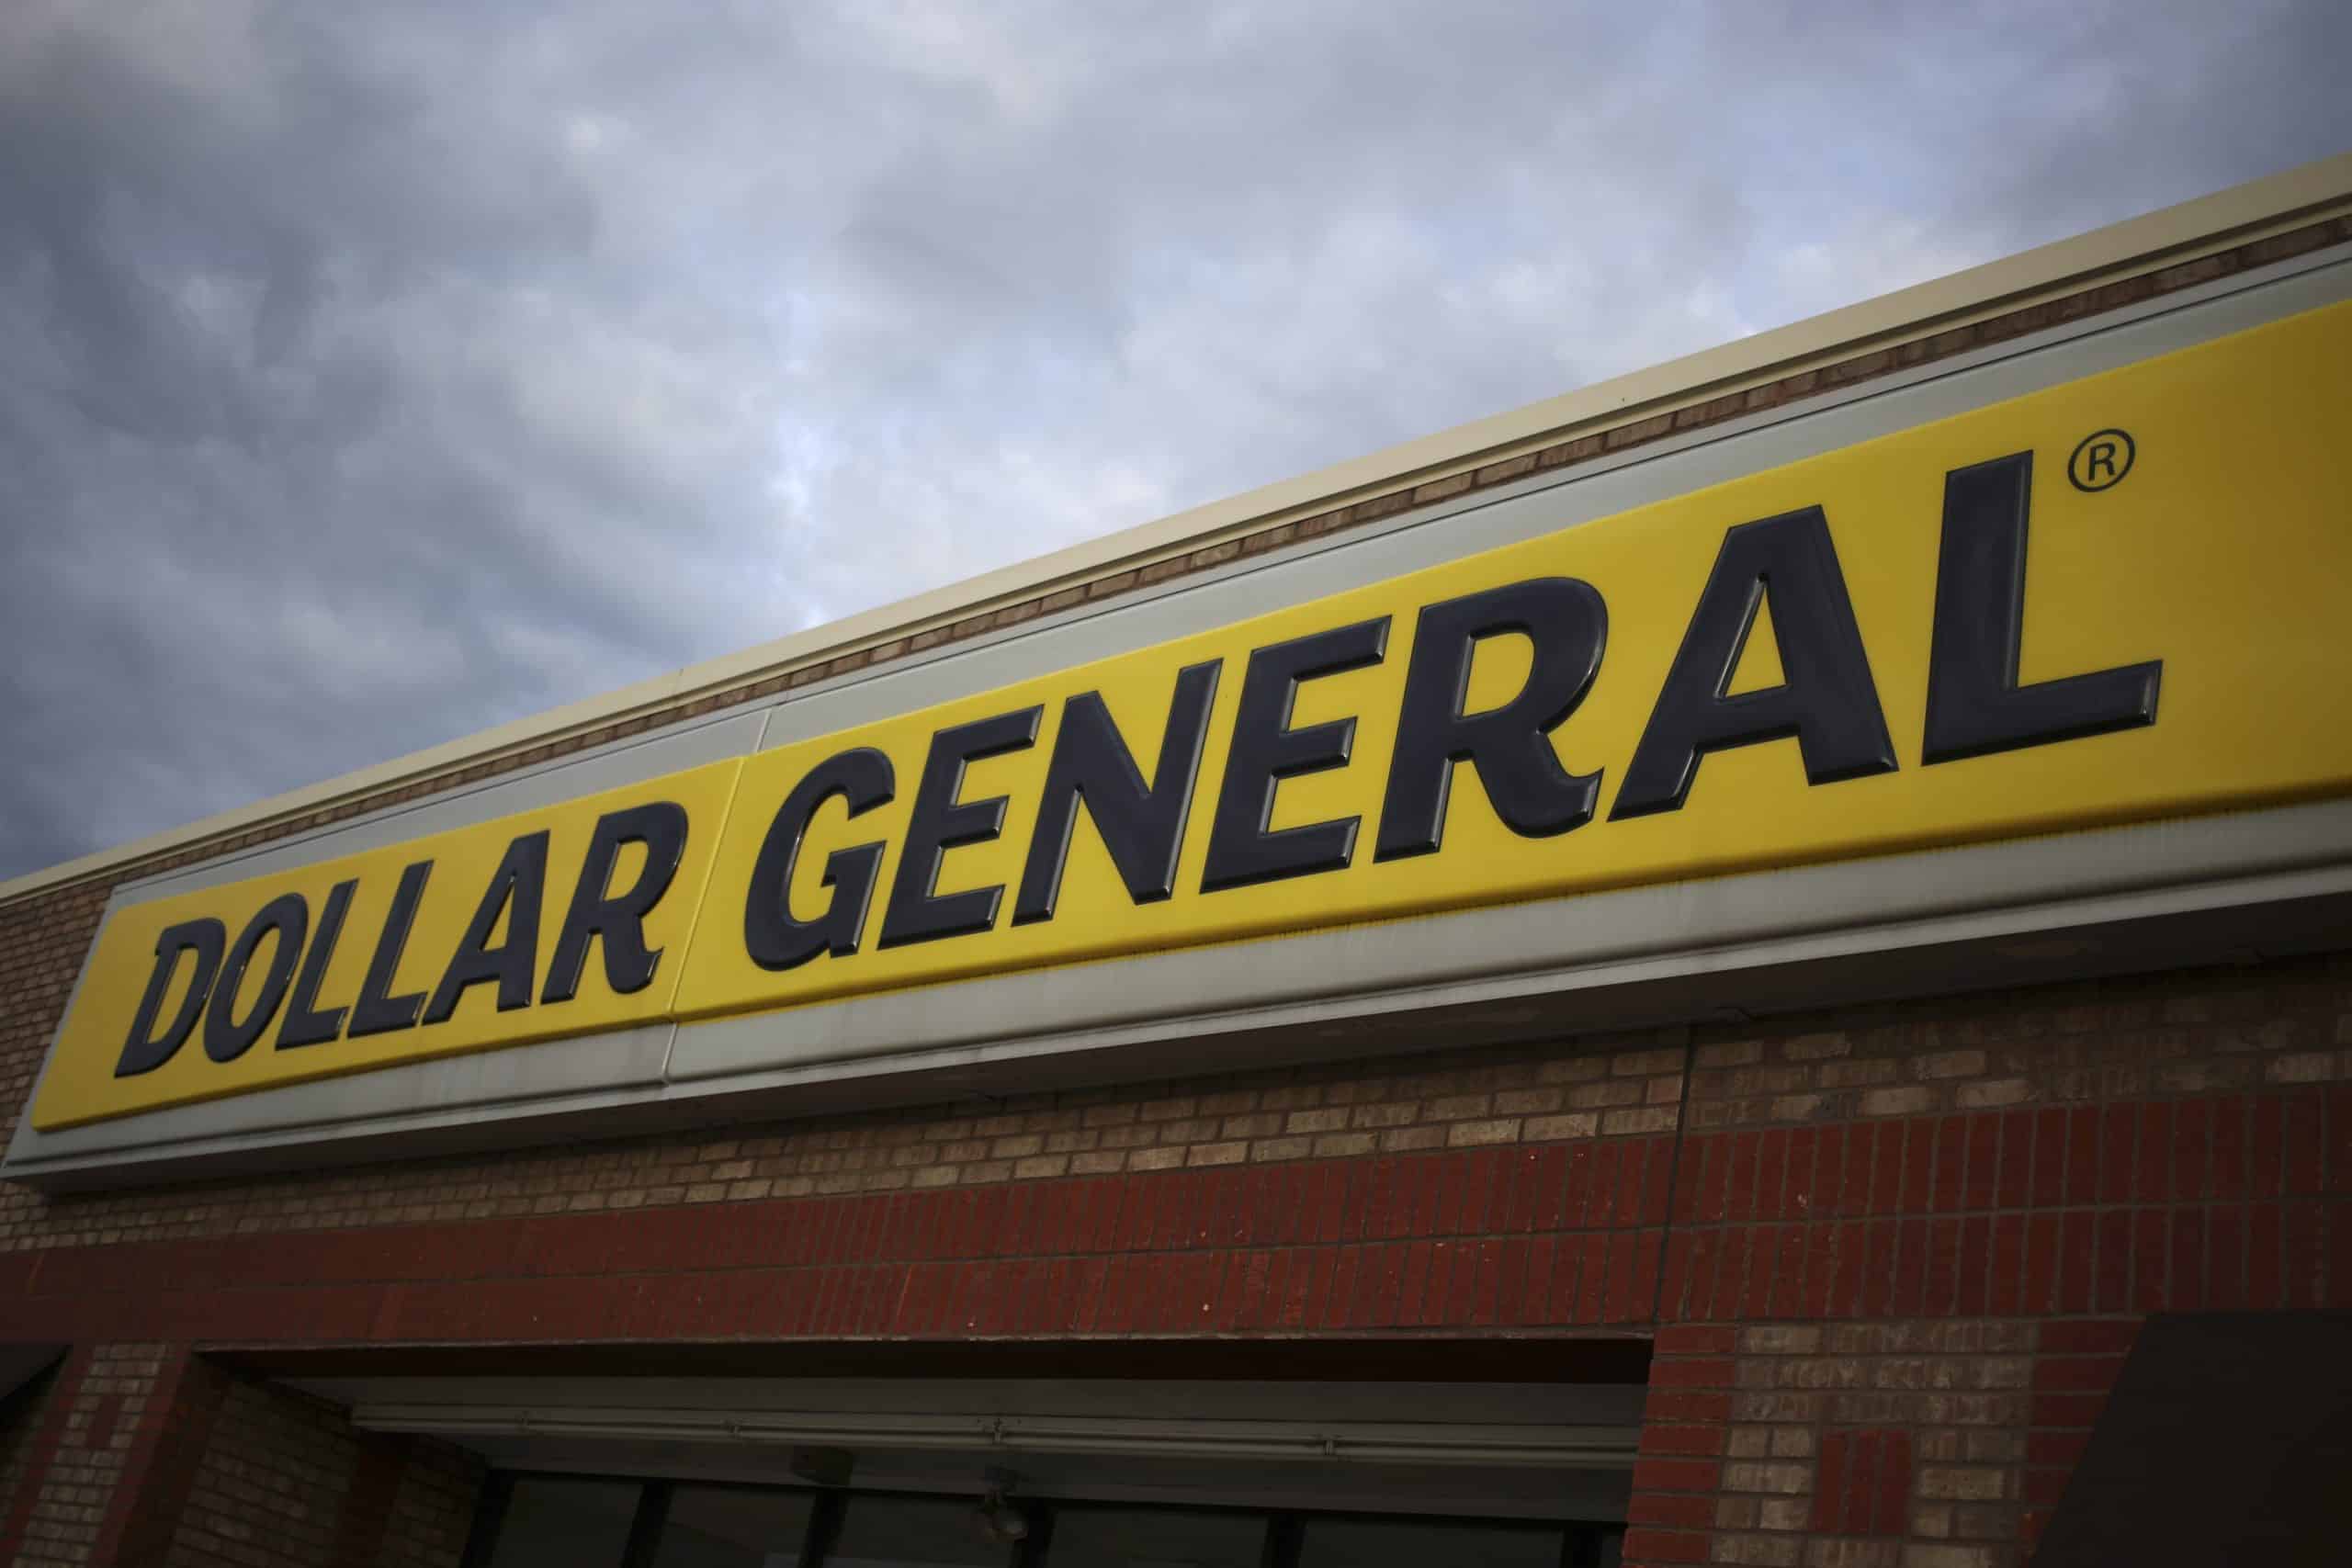 Woman recalls sounds of gunfire, feelings of fear – in emotional post after the Dollar General shooting in Cheektowaga